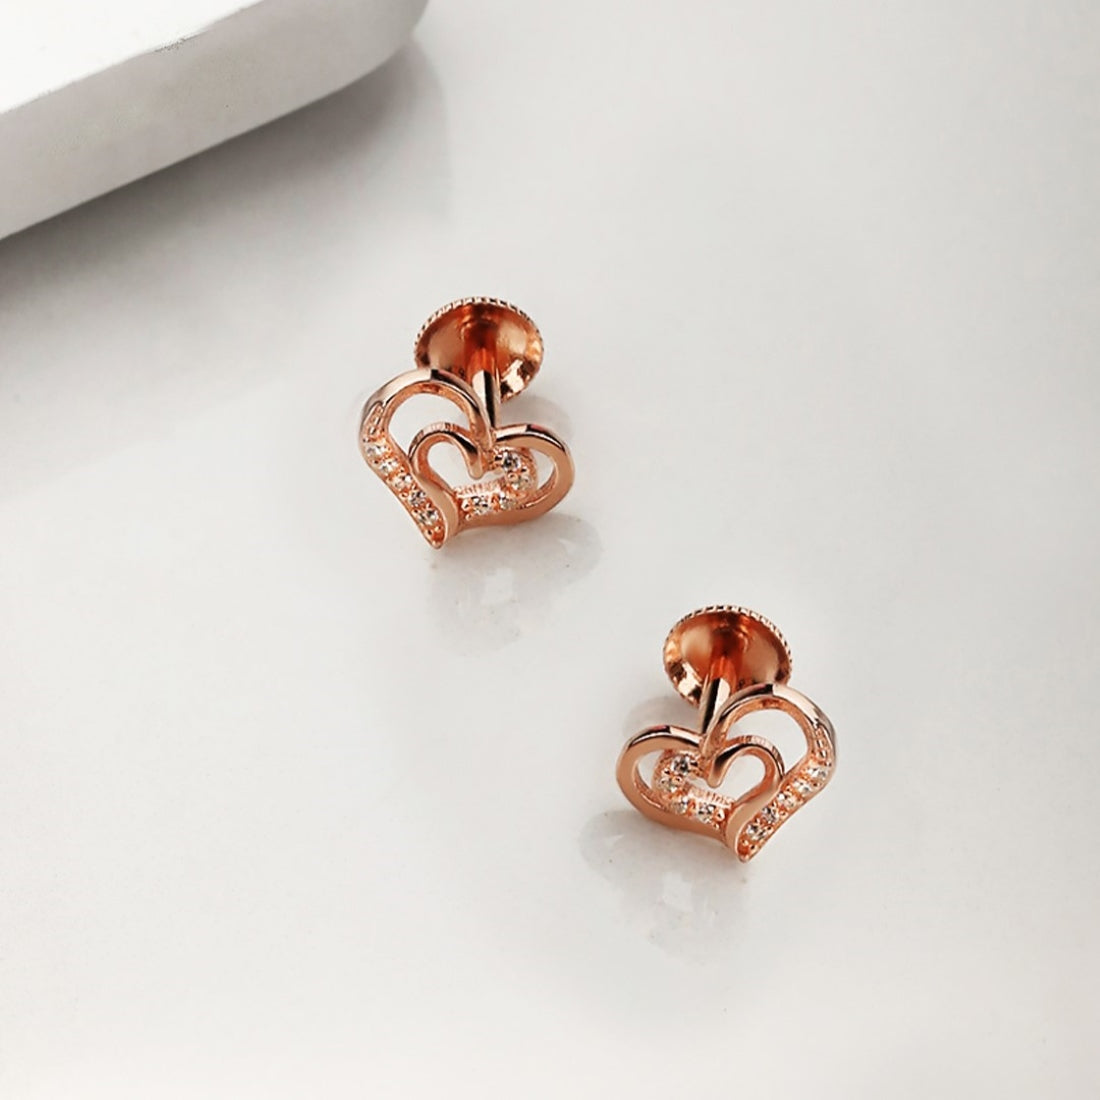 Heartfelt Radiance Rose Gold-Plated 925 Sterling Silver Earrings with CZ